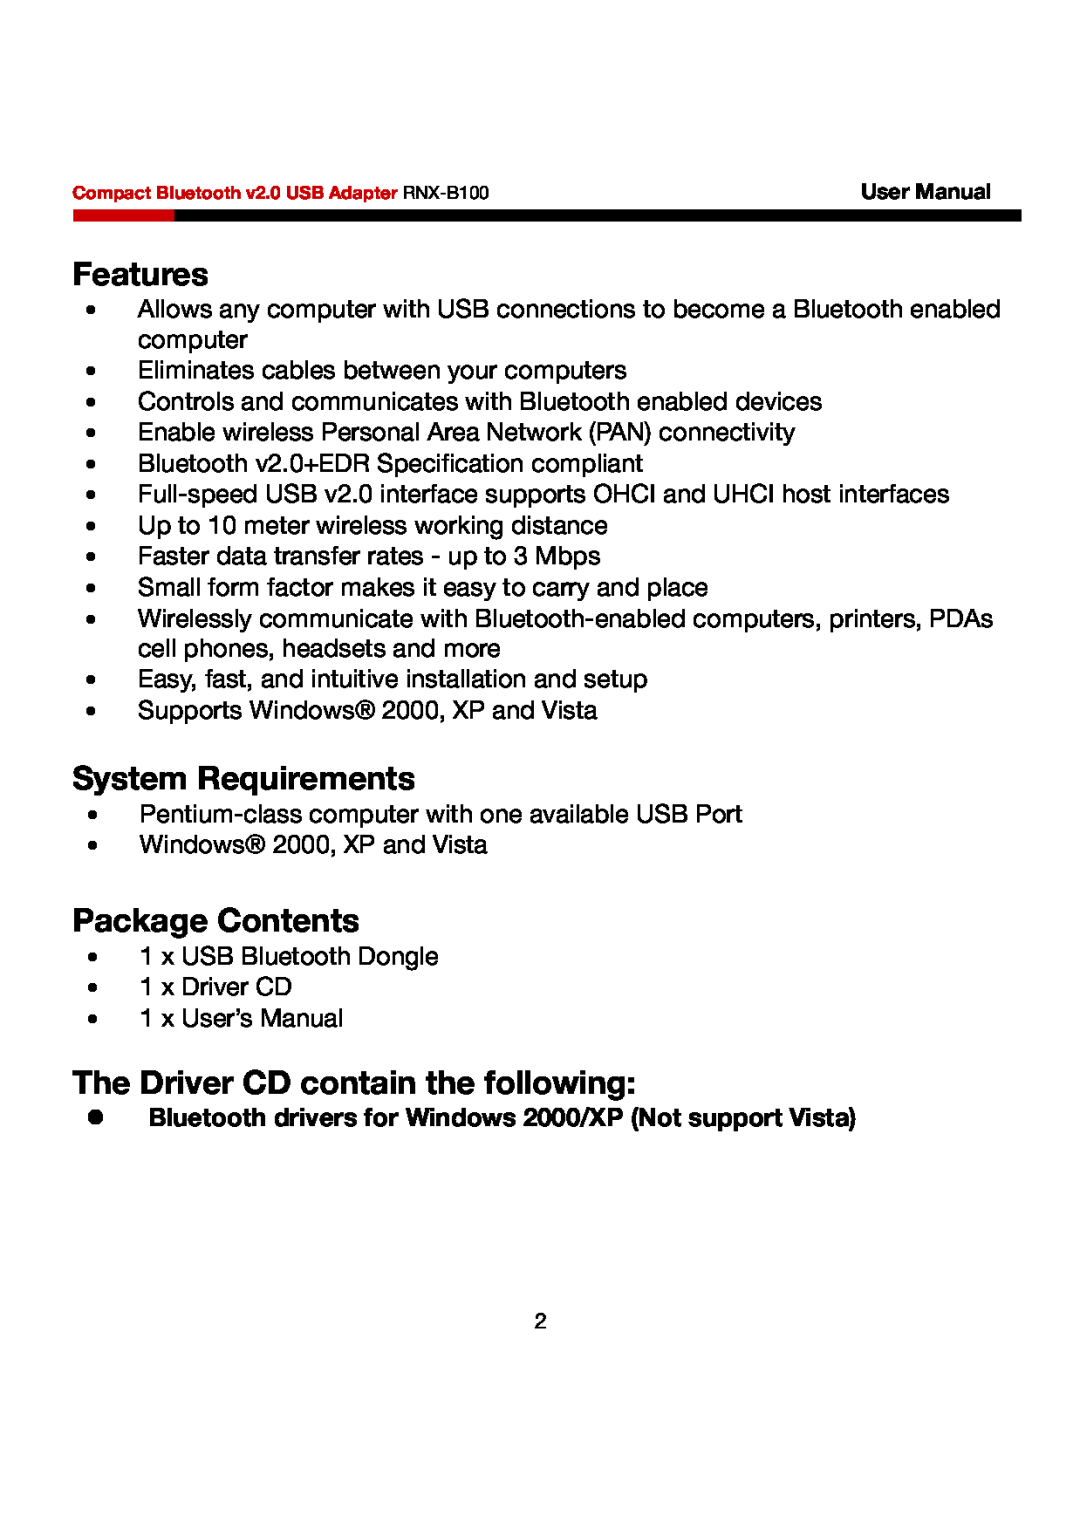 Rosewill RNX-B100 user manual Features, System Requirements, Package Contents, The Driver CD contain the following 